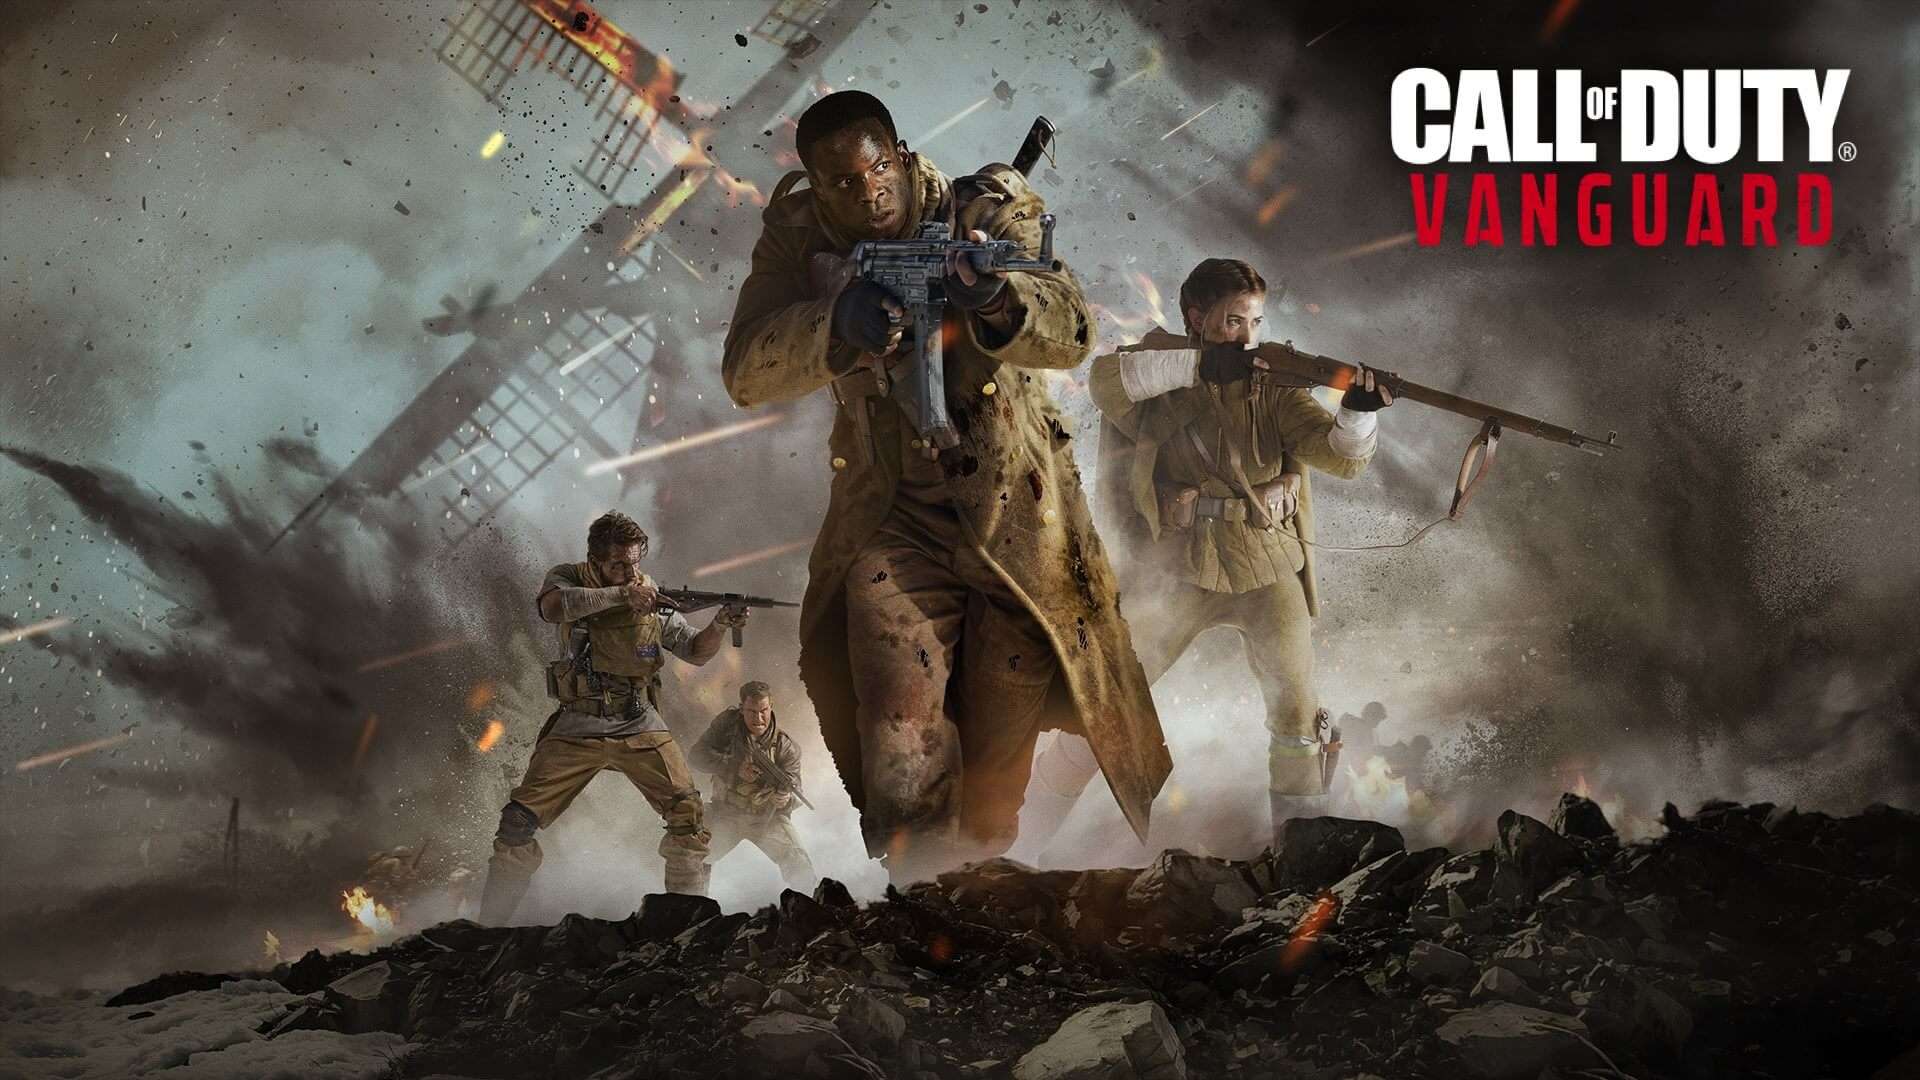 call of duty vanguard promotional